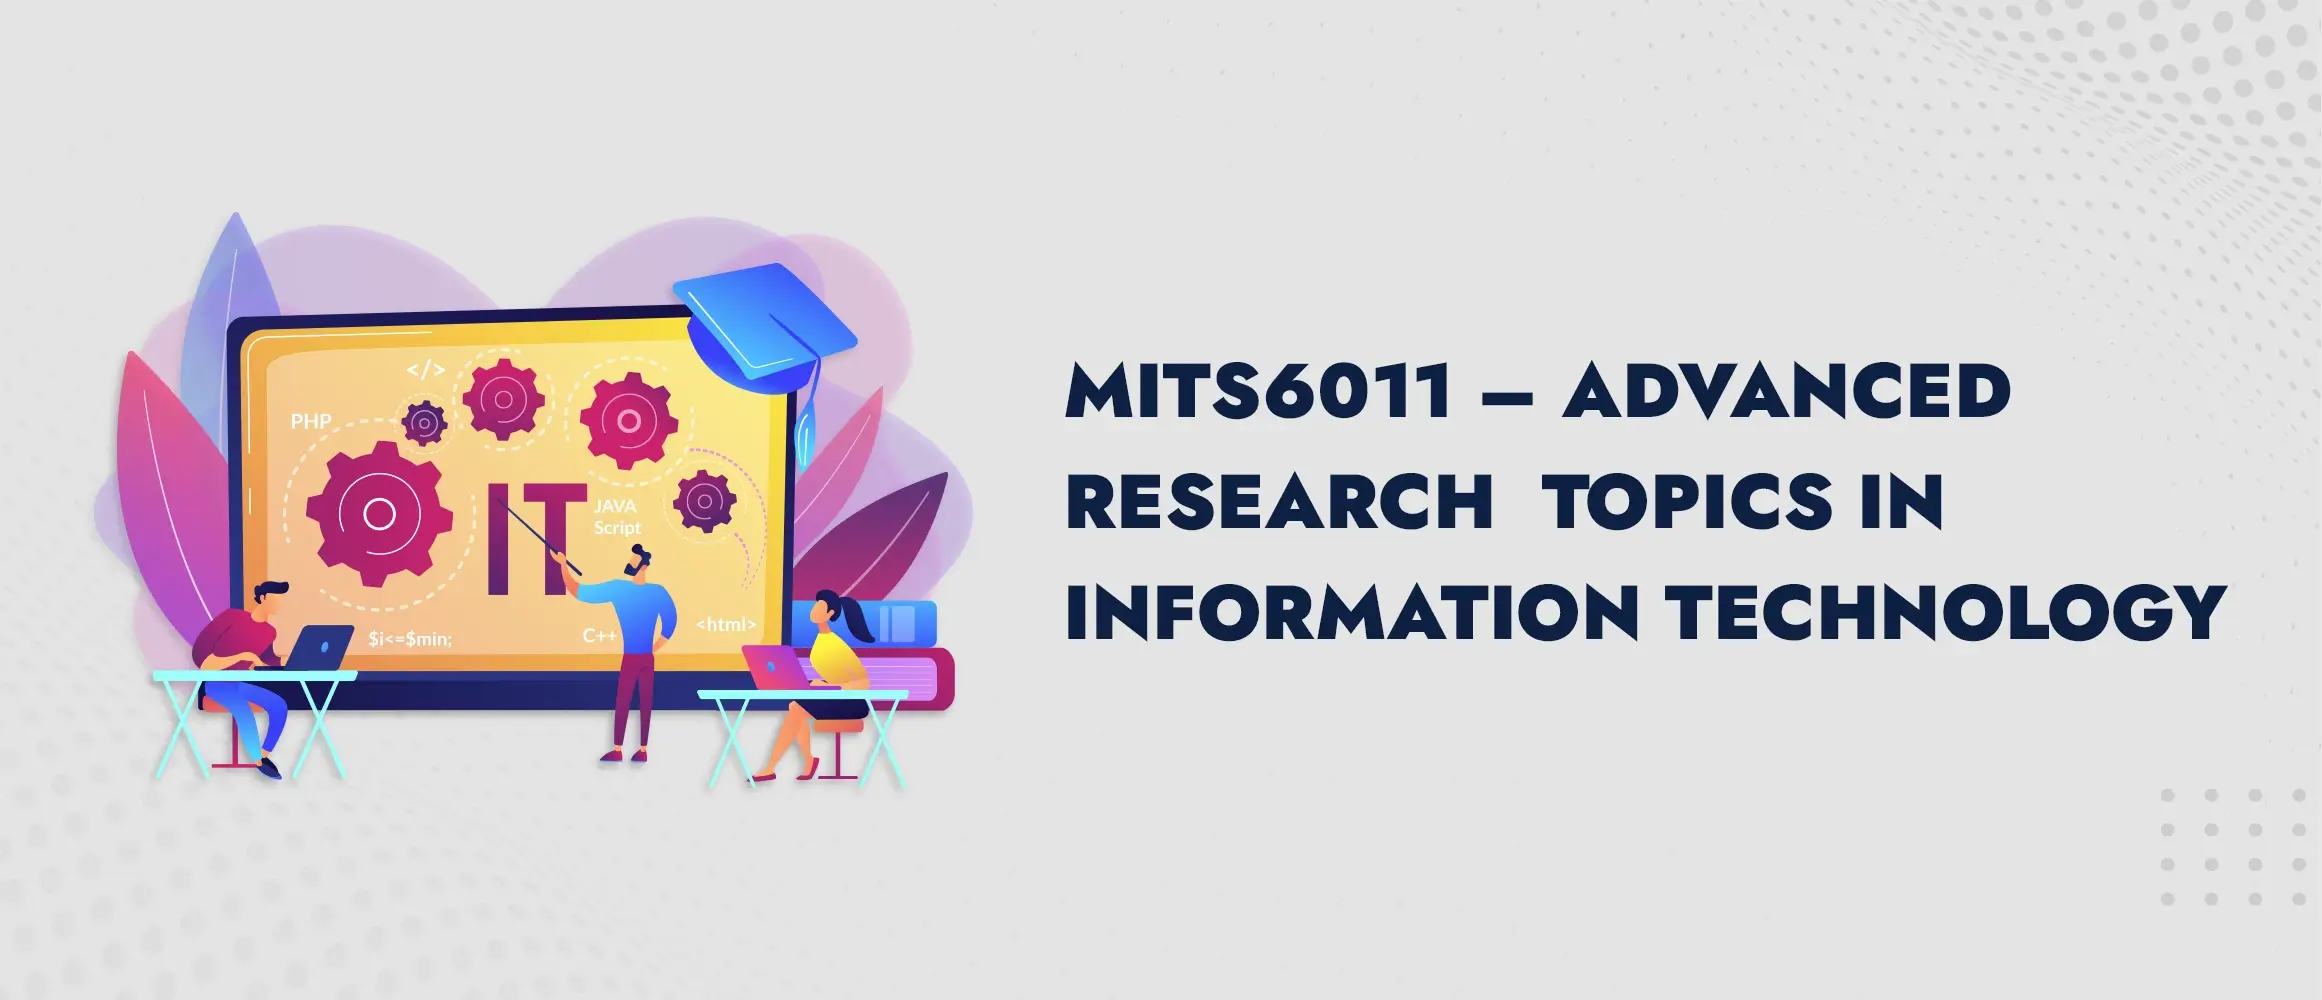 MITS6011 Advanced Research Topics In Information Technology